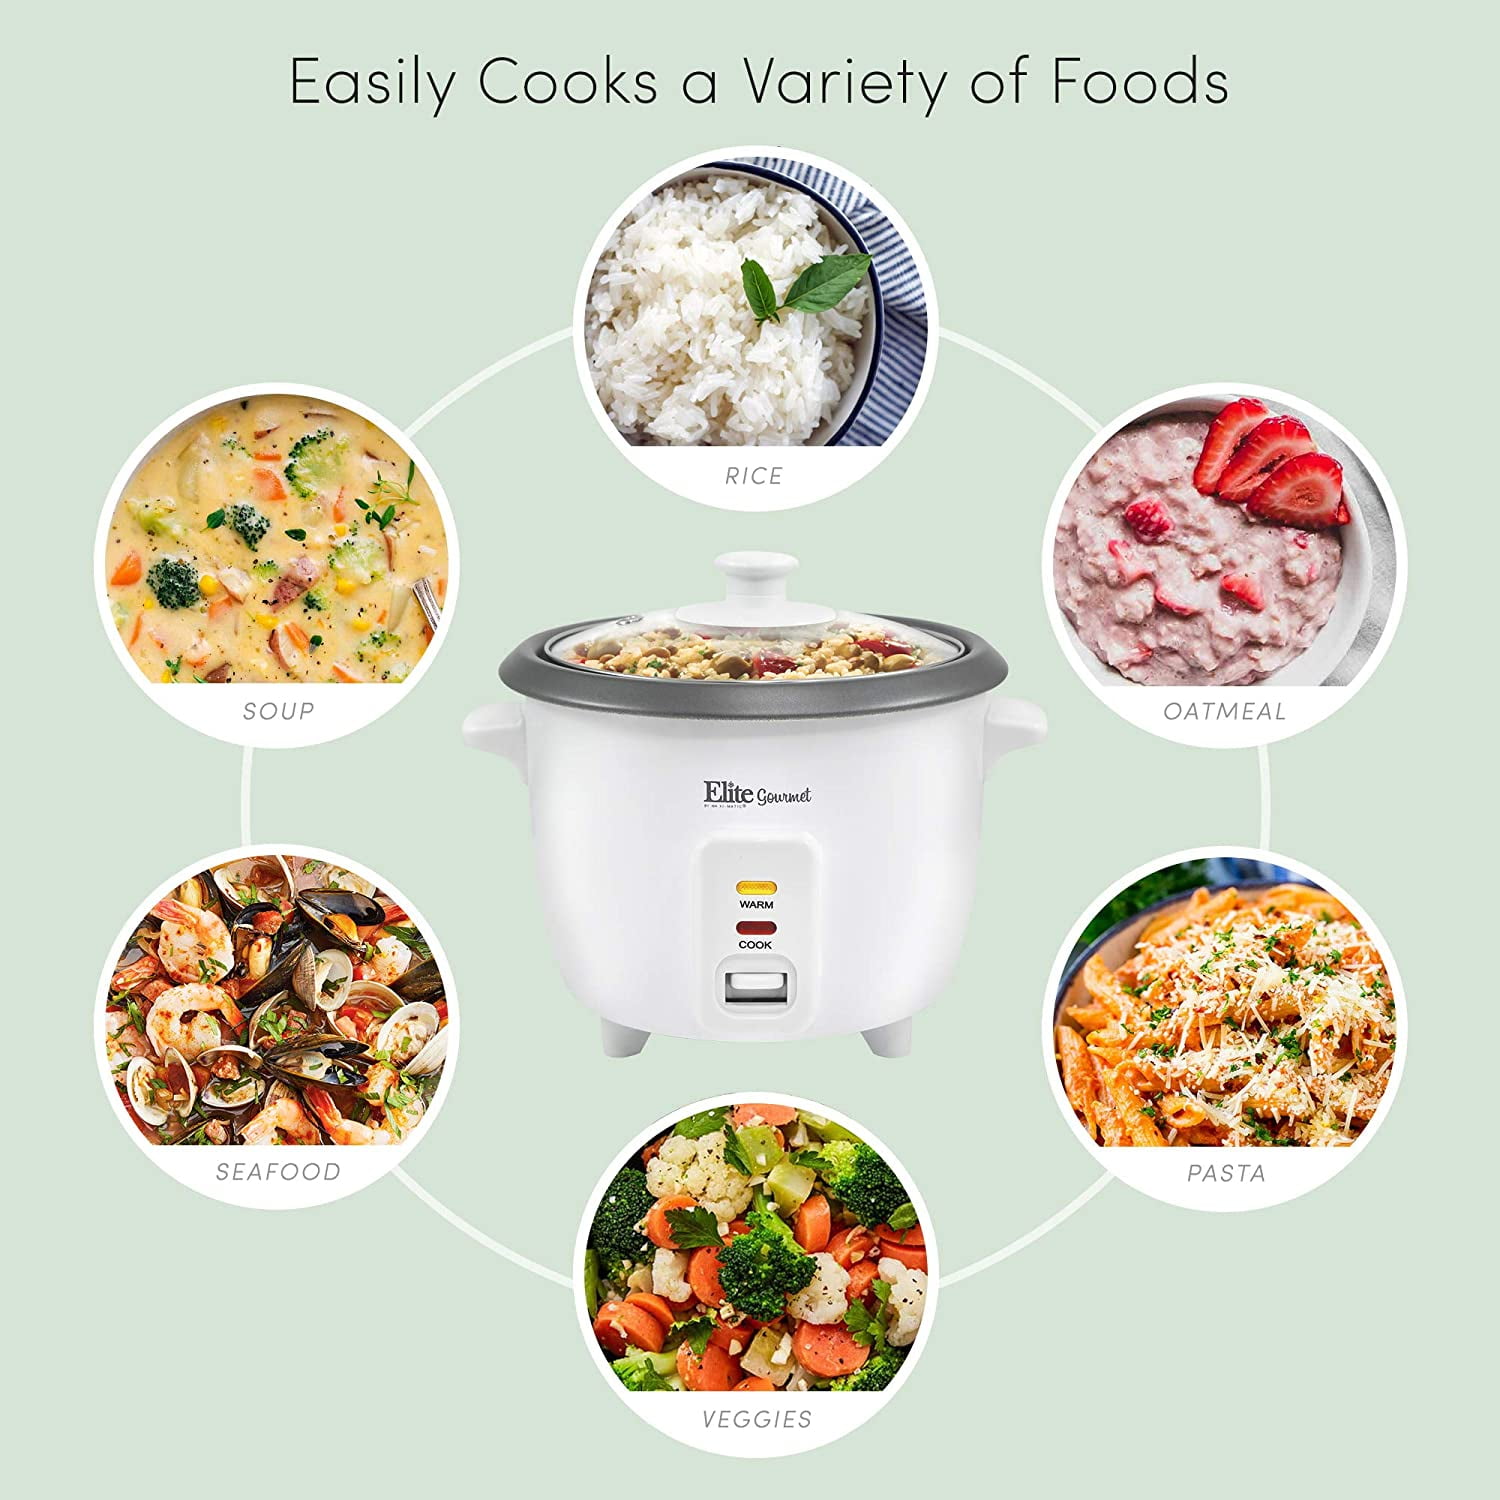 Elite Gourmet 6-Cup Rice Cooker with Steam Tray white  - Best Buy